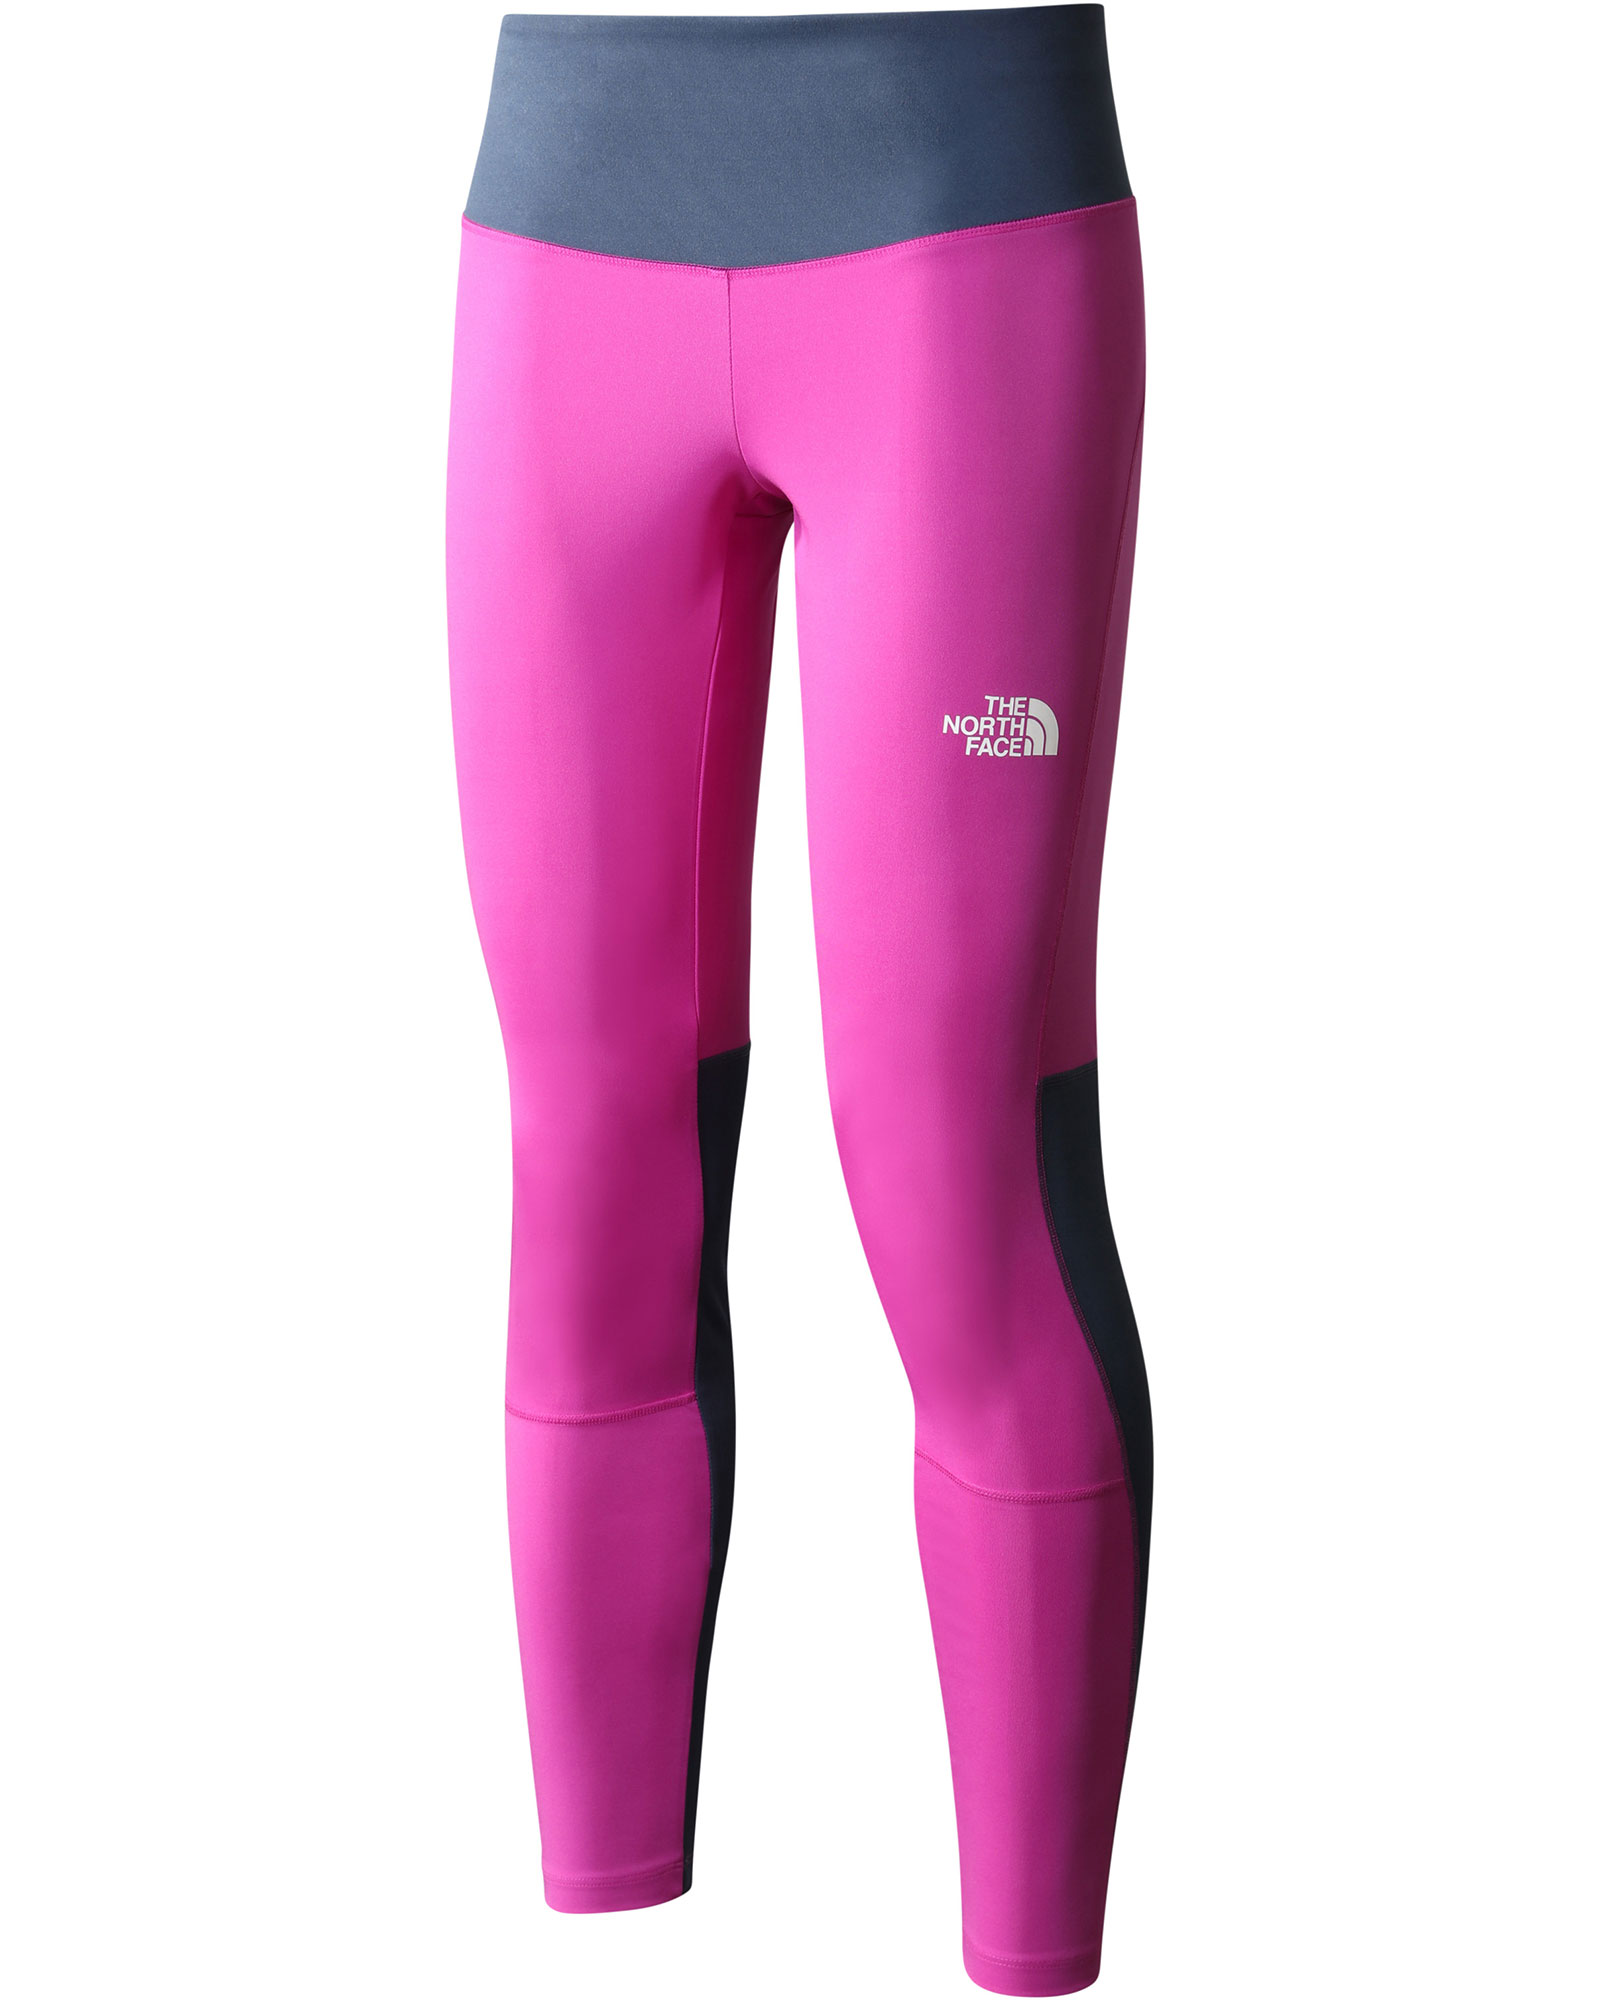 The North Face Women’s MA Tight - Purple Cactus Flow L